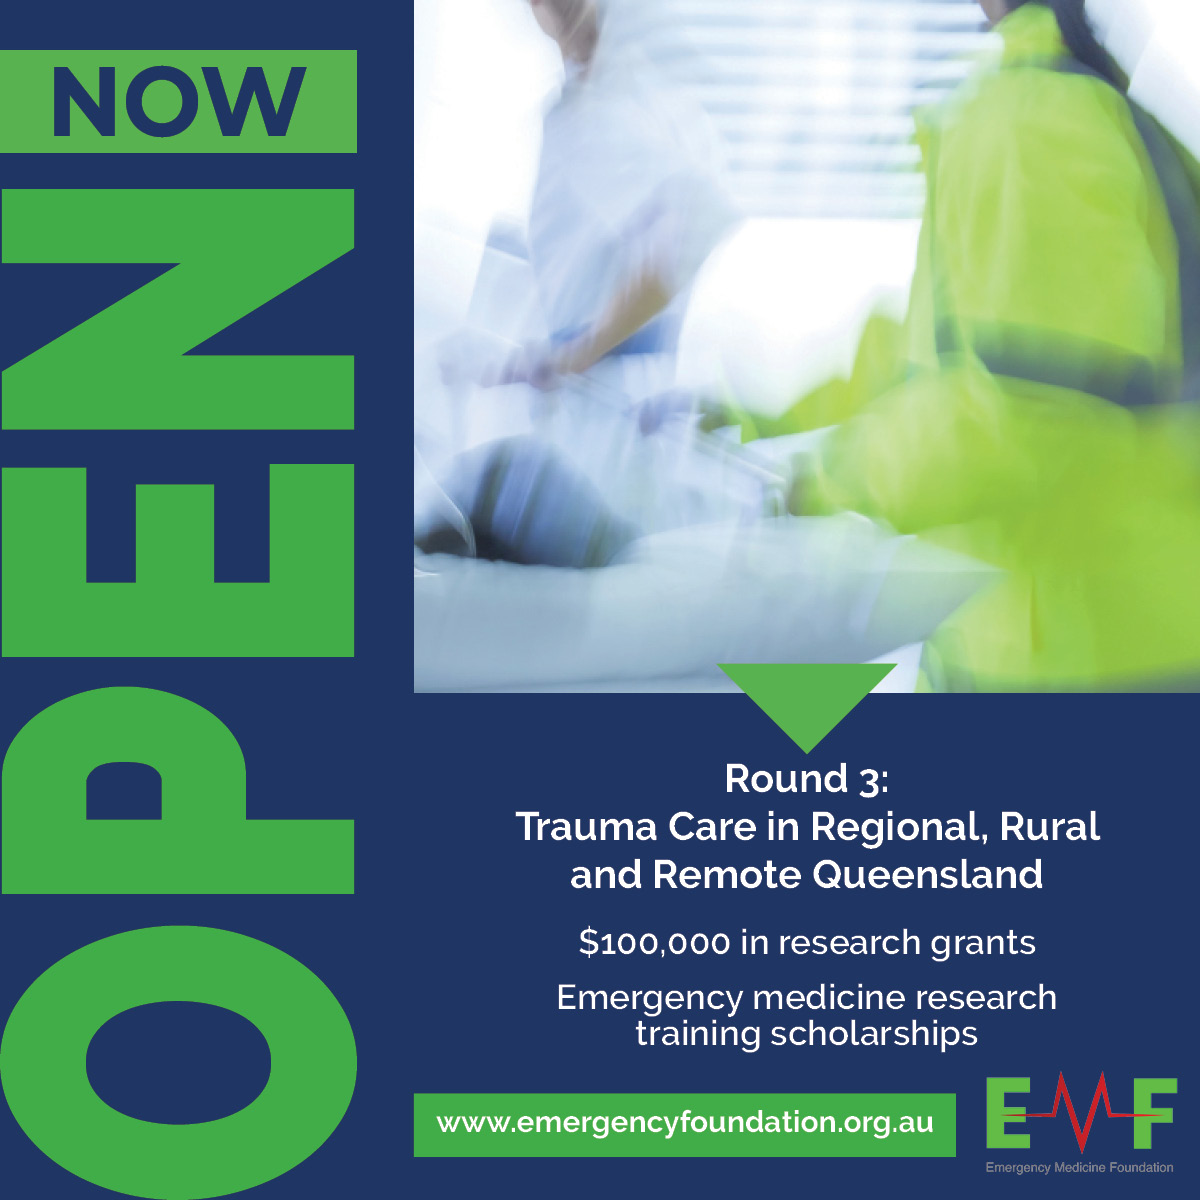 📢Round 3 of the Trauma Care in Regional, Rural and Remote Queensland special research program is NOW OPEN! 📢 1/3
emergencyfoundation.org.au/trauma-care #emfresearch #research #medicalresearch #ruralmedicine